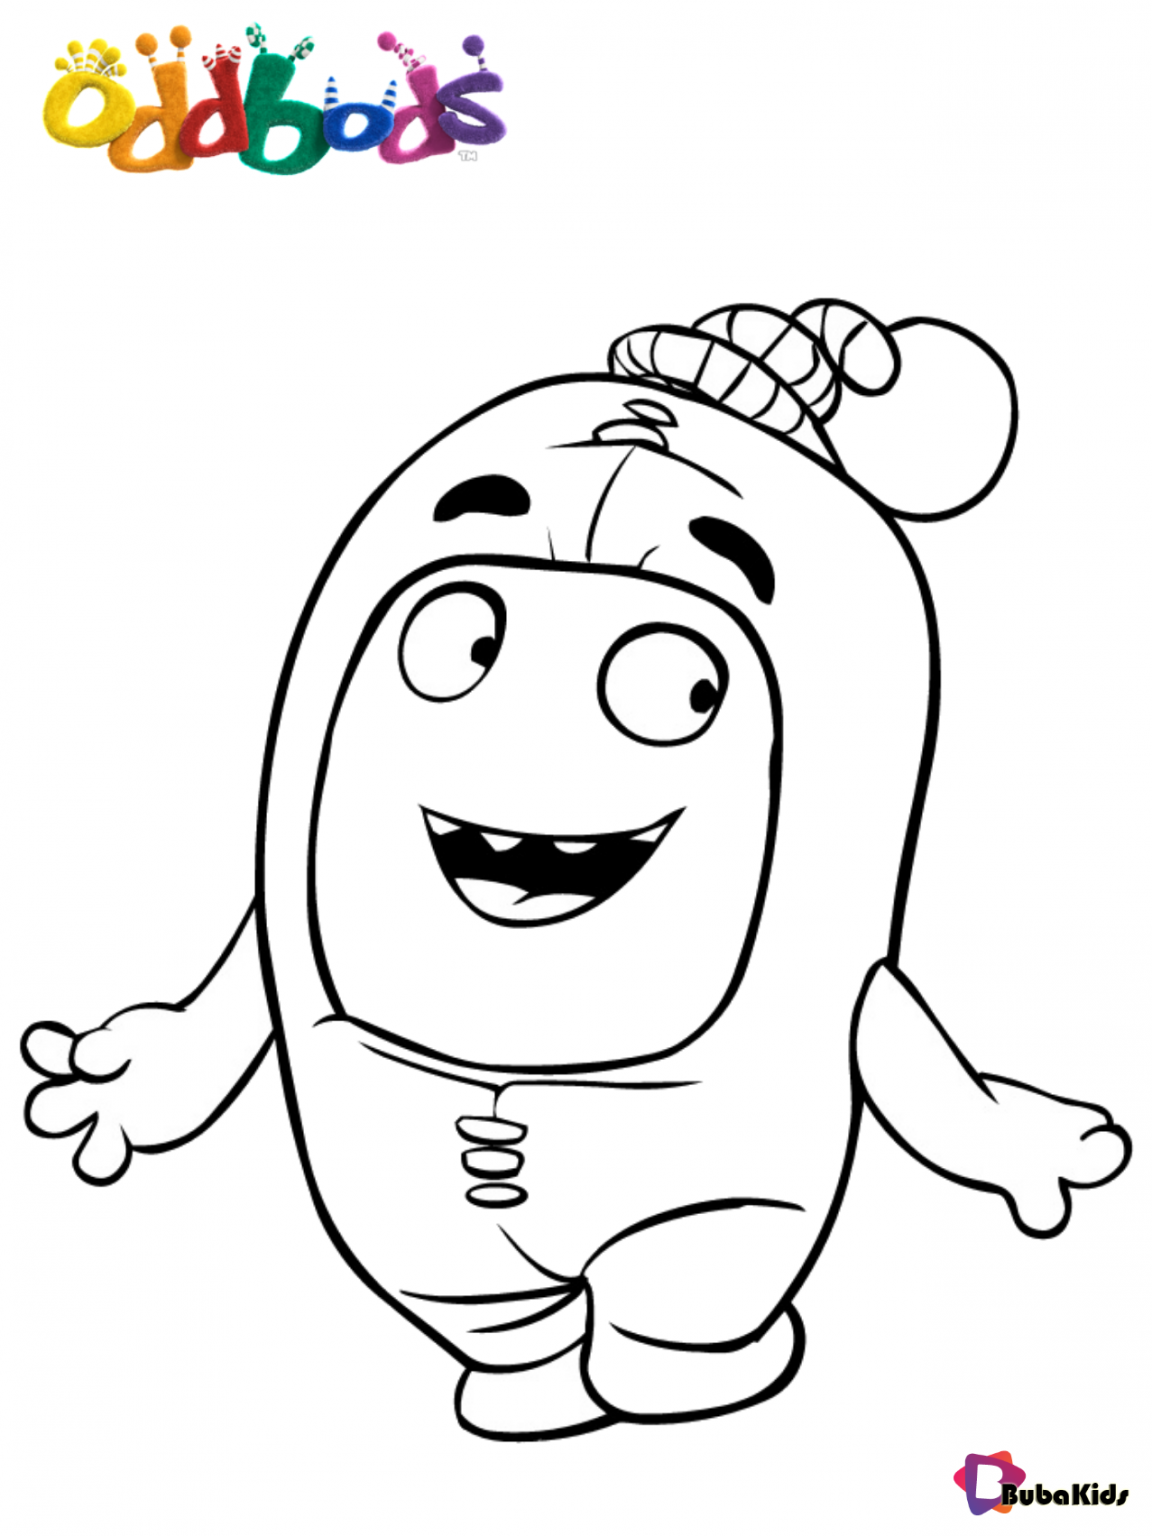 oddbods-newt-free-and-printable-coloring-pages-bubakids